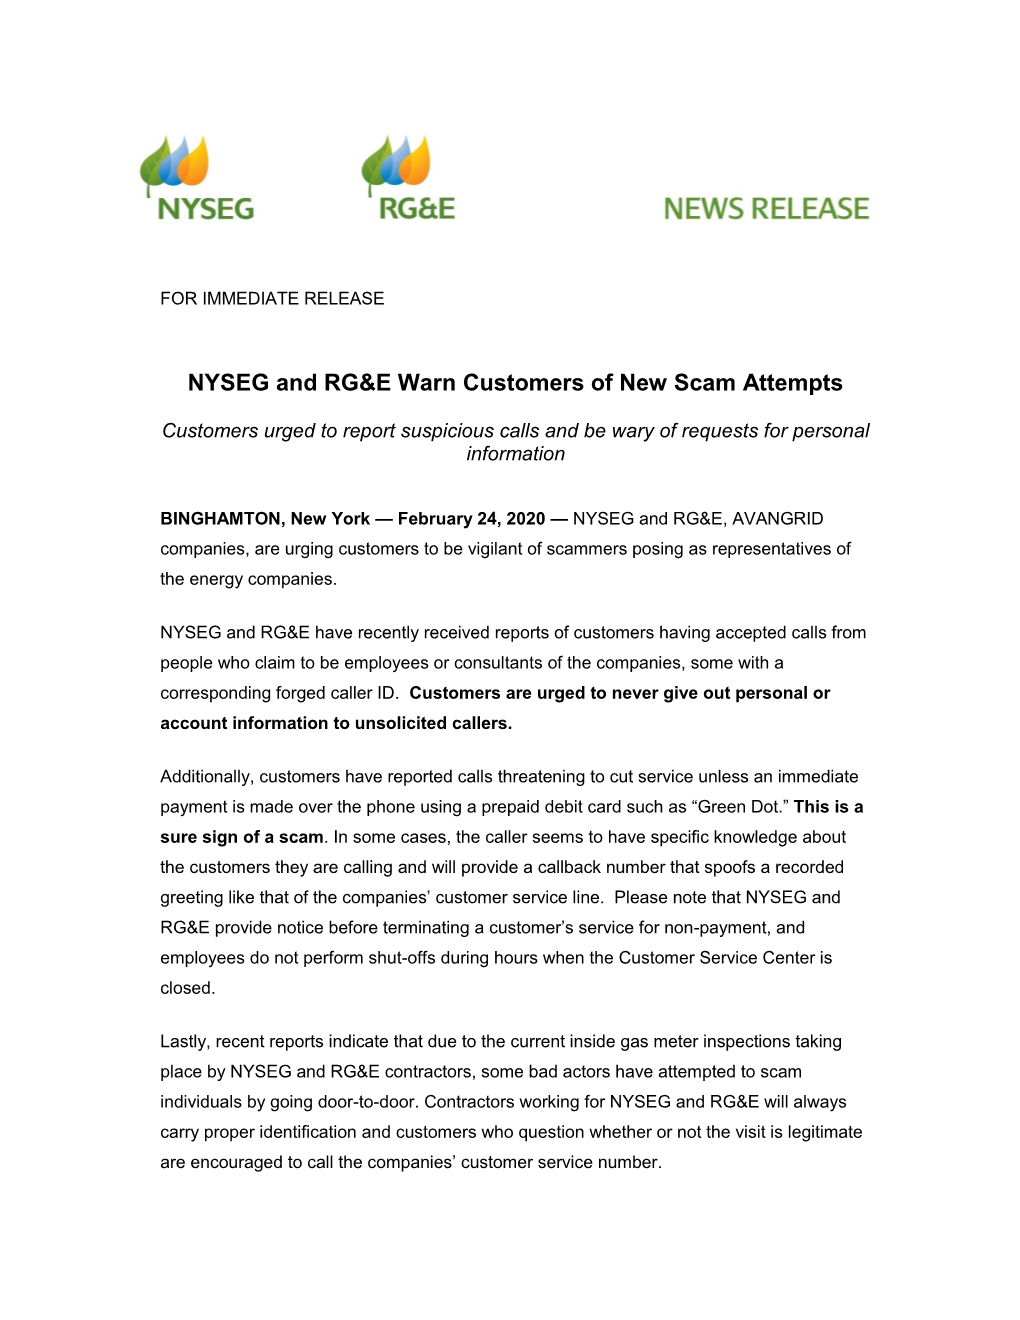 NYSEG and RG&E Warn Customers of New Scam Attempts